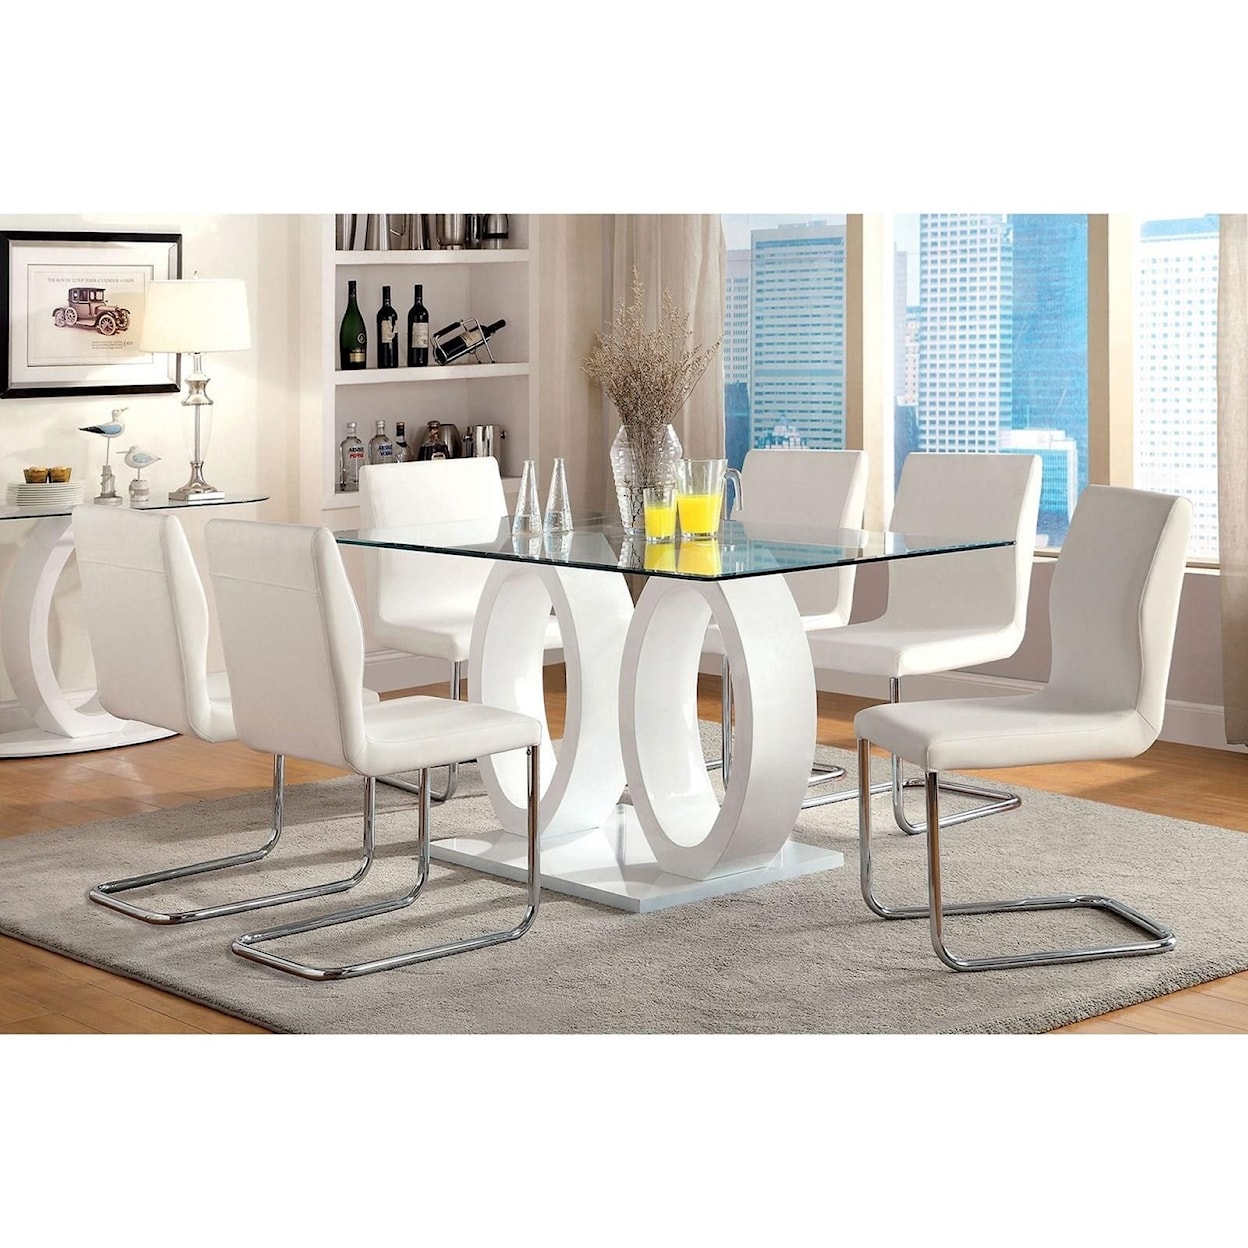 FUSA Lodia I Table and 6 Side Chairs